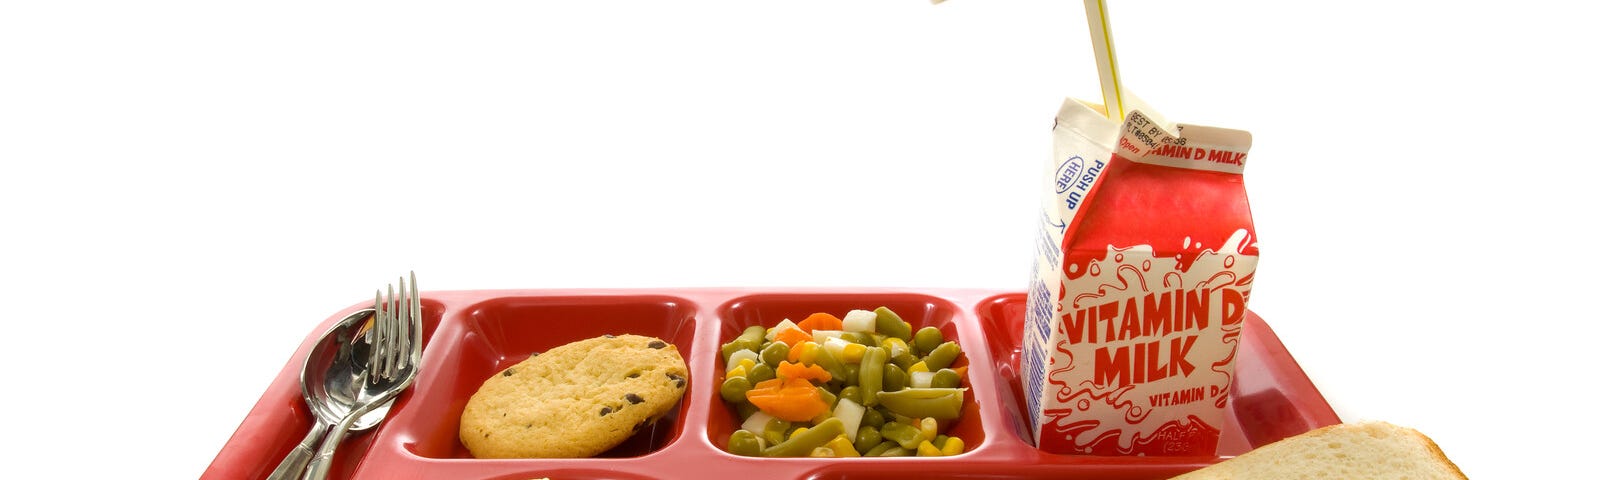 school lunch on red tray. chicken nuggets, boxed milk and chocolate chip cookie.